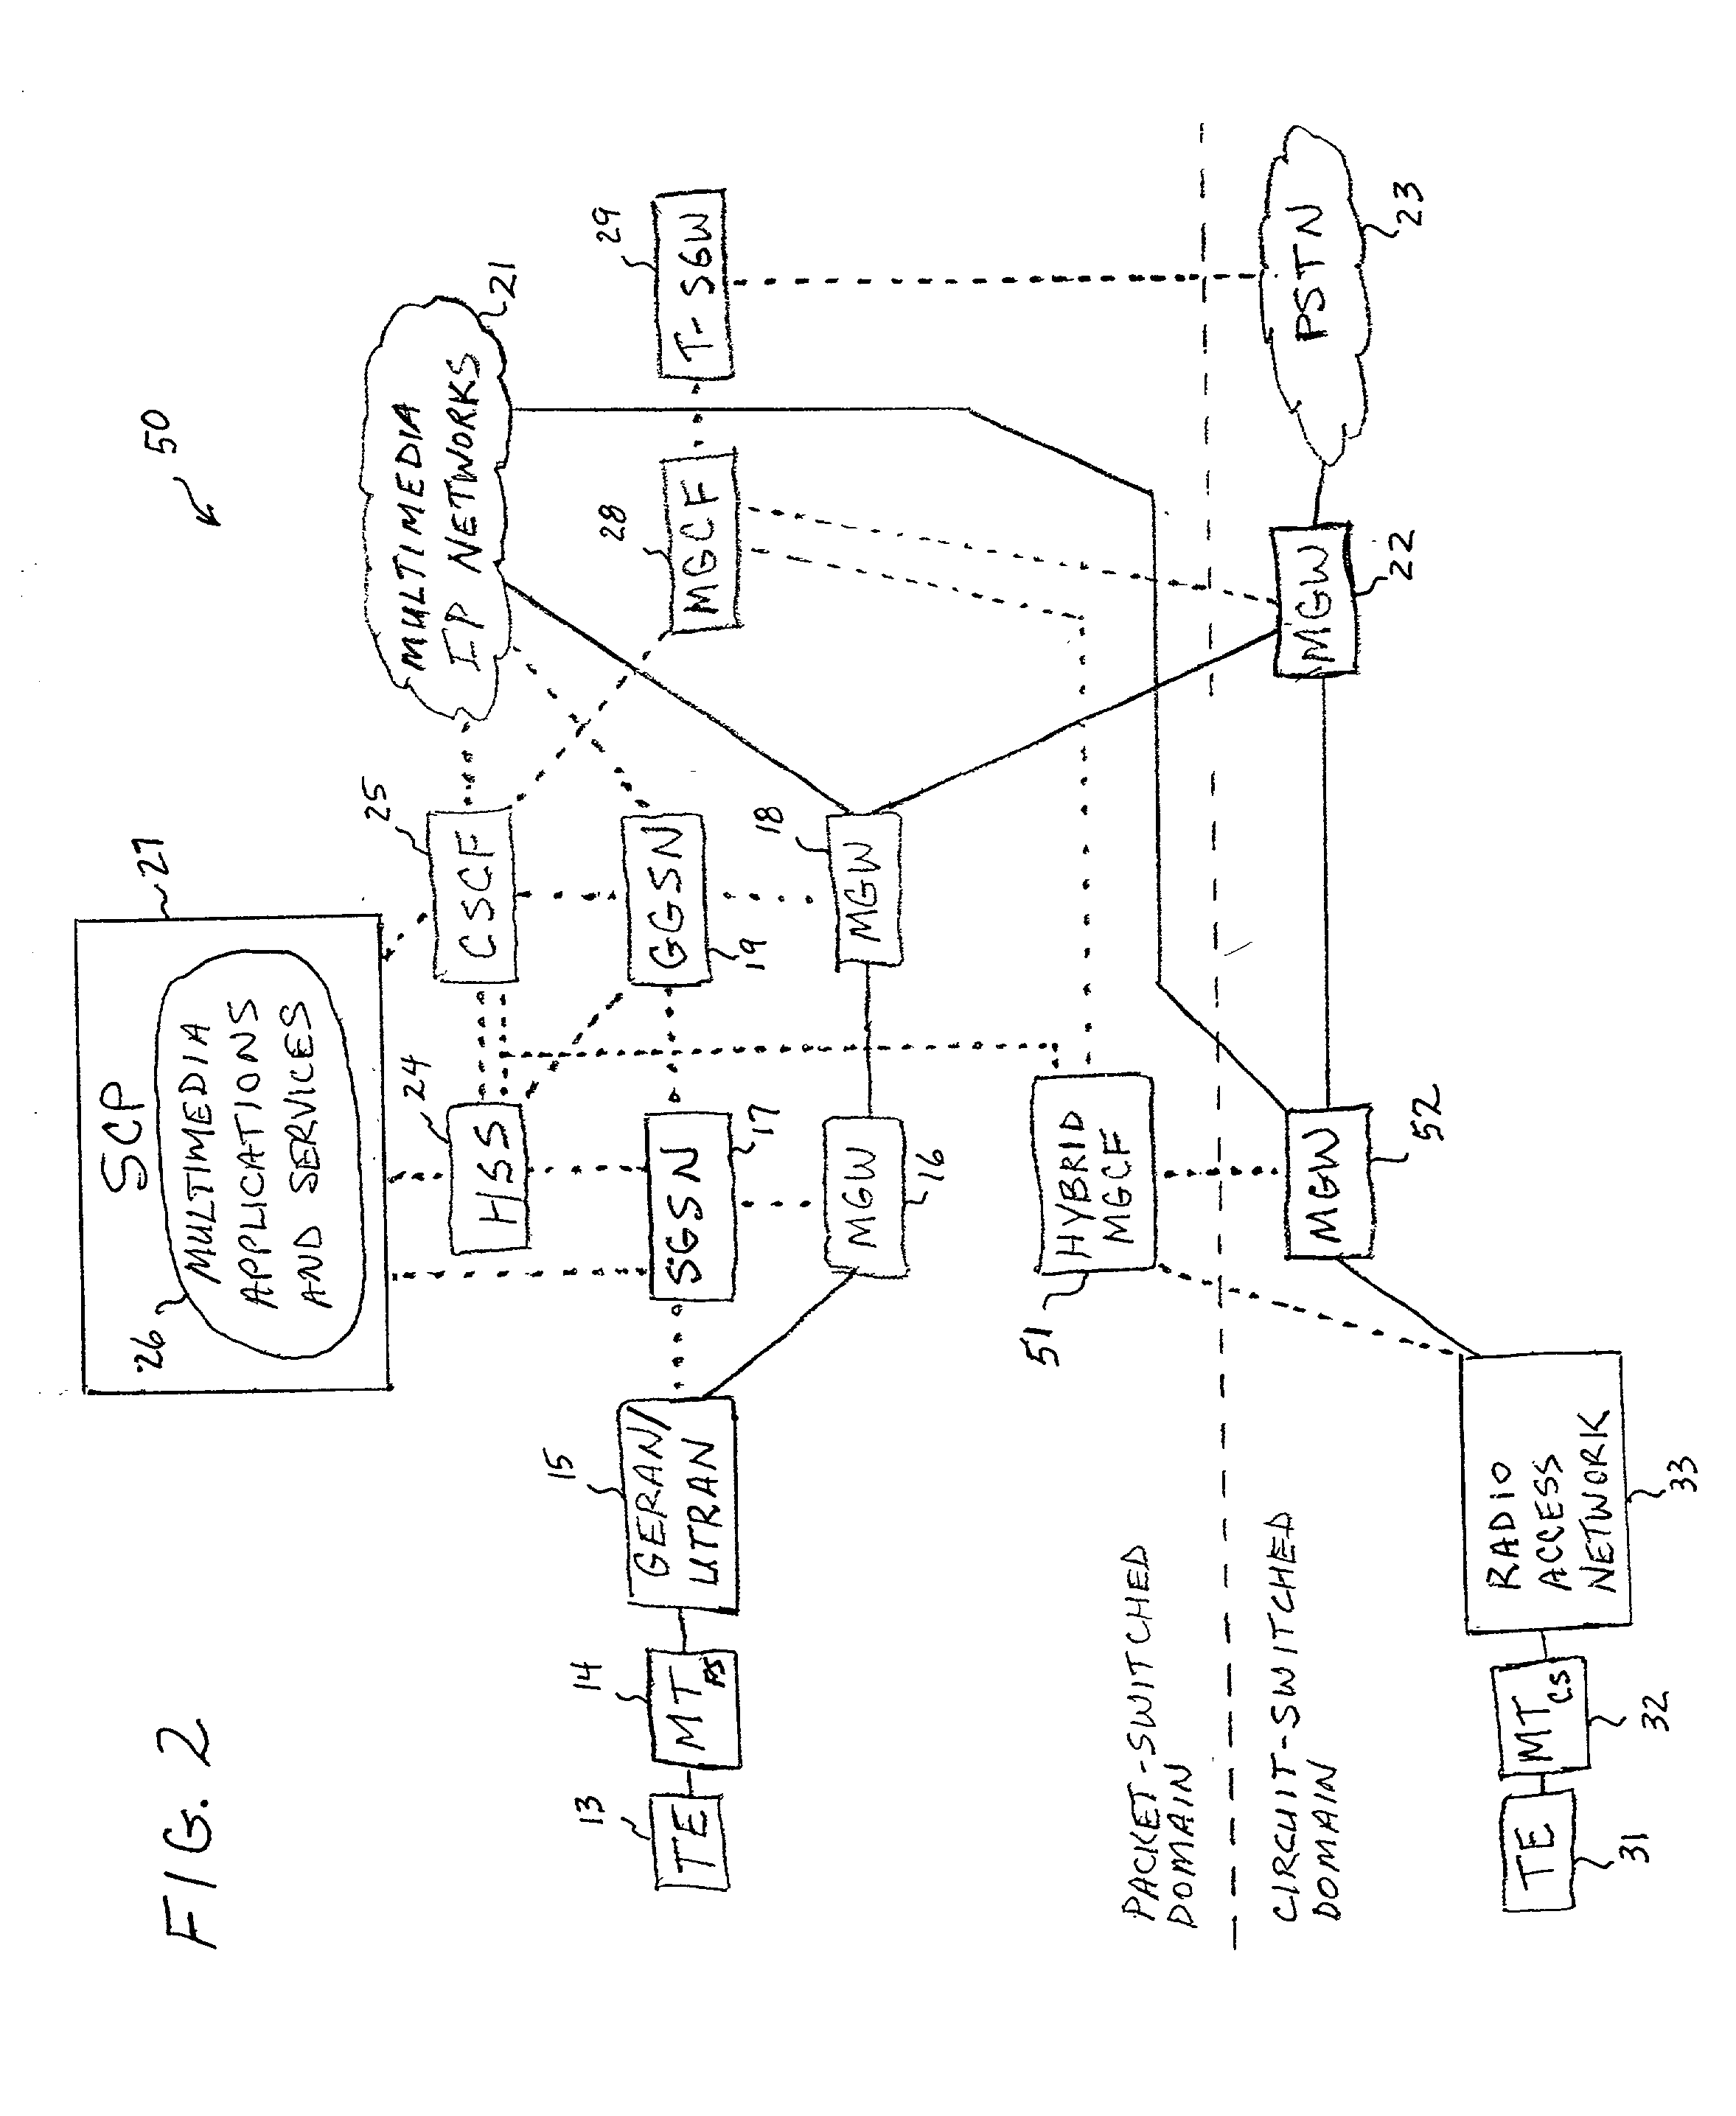 Hybrid media gateway control function providing circuit-switched access to a packet-switched radio telecommunications network